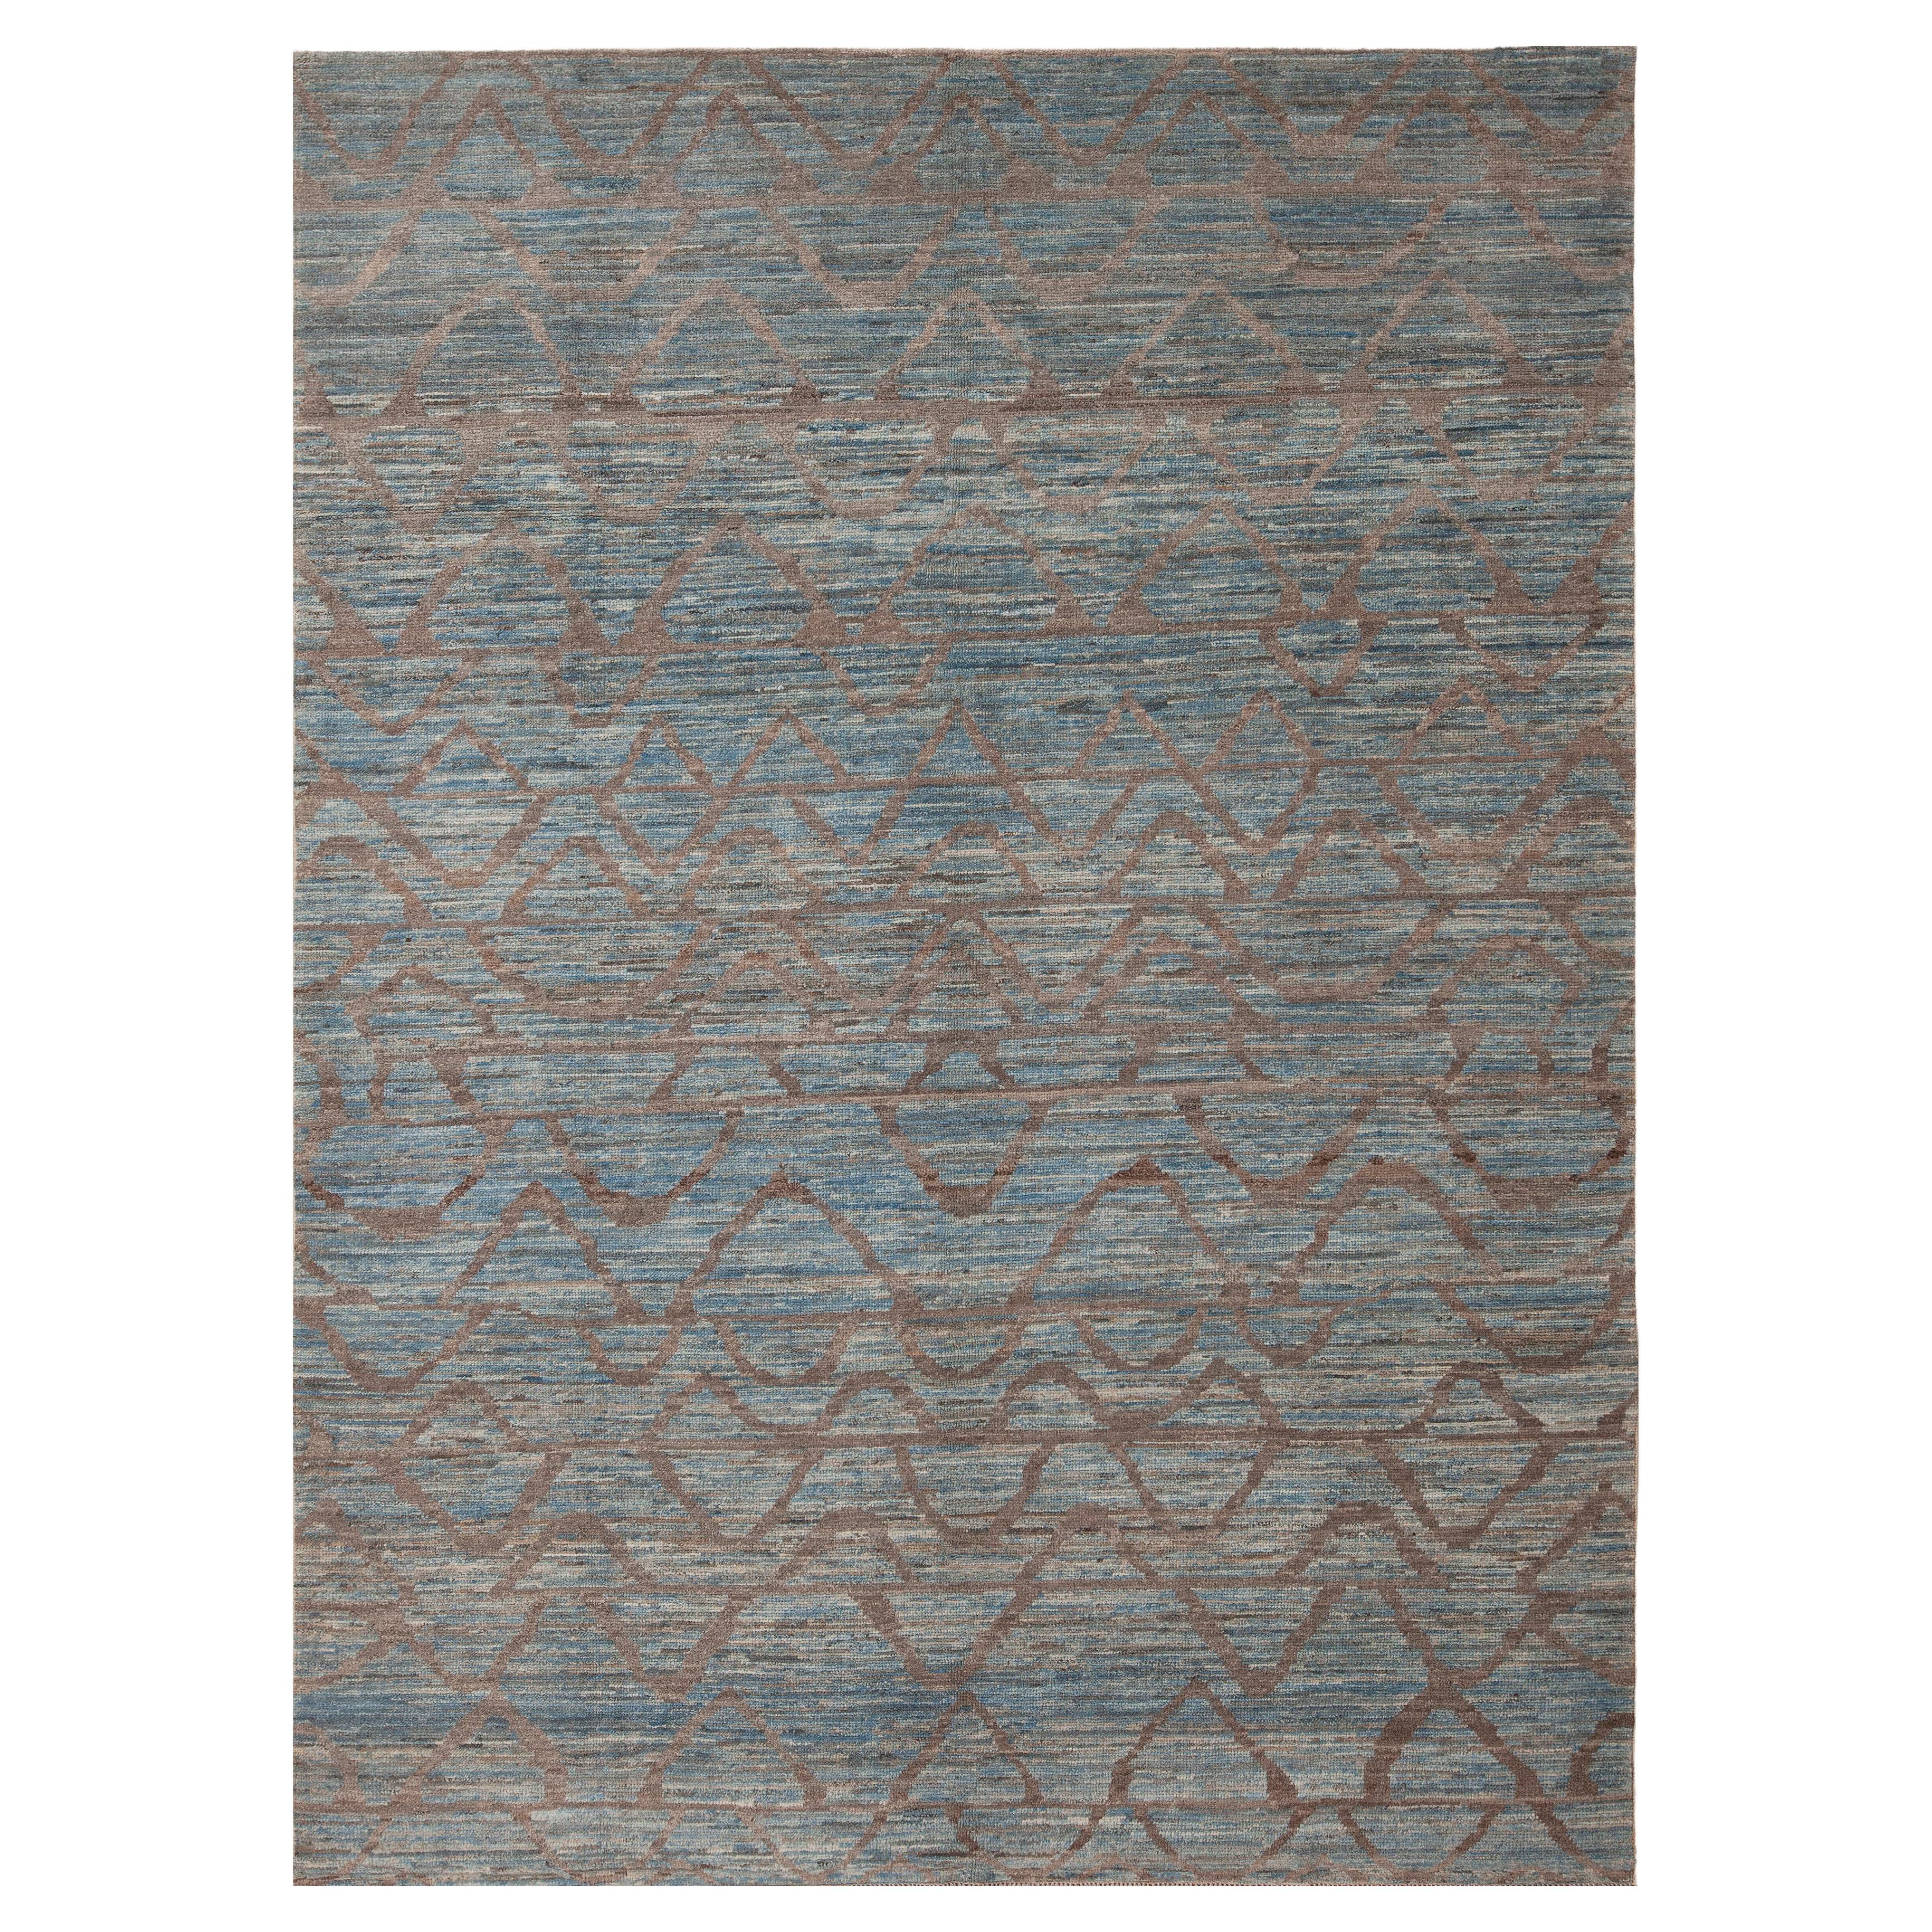 Nazmiyal Collection Blue And Brown  Abstract Modern Area Rug 6'11" x 9'8"